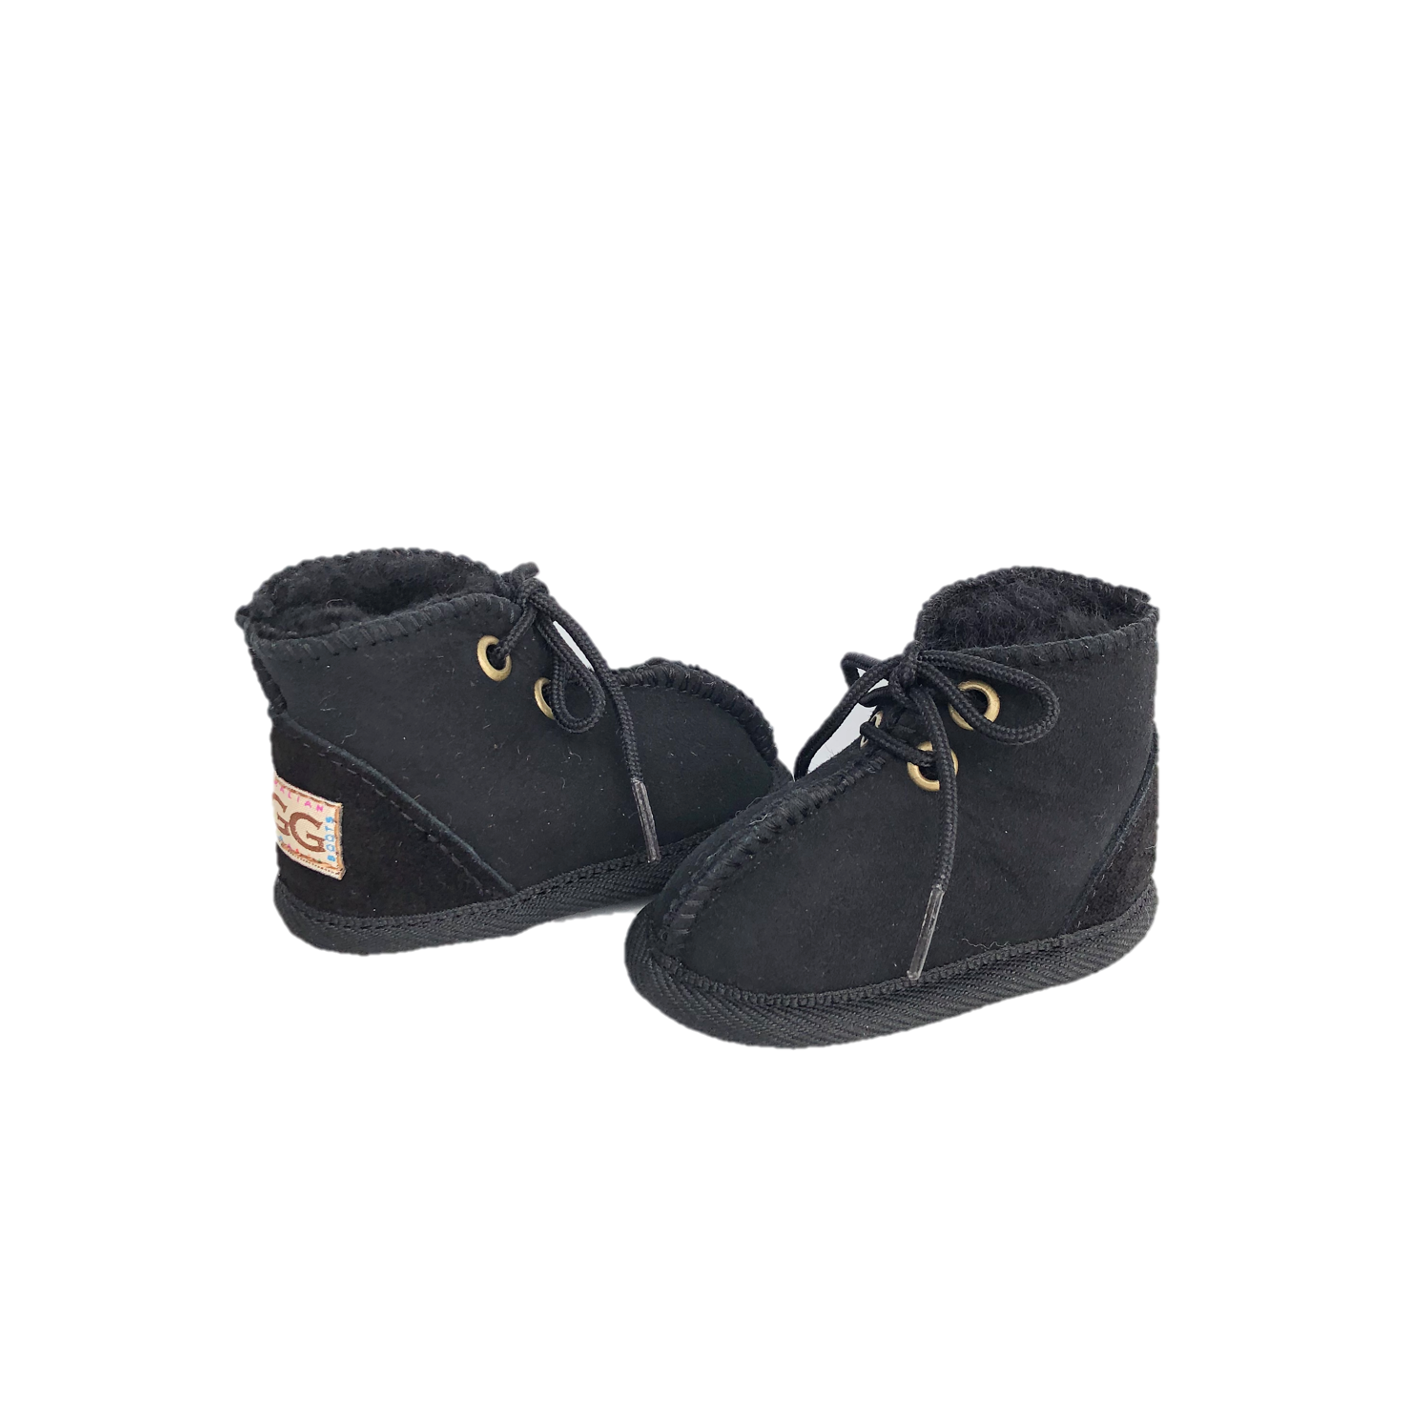 CLEARANCE BABY BOOTIES BLACK -  SMALL  (0-6 months)